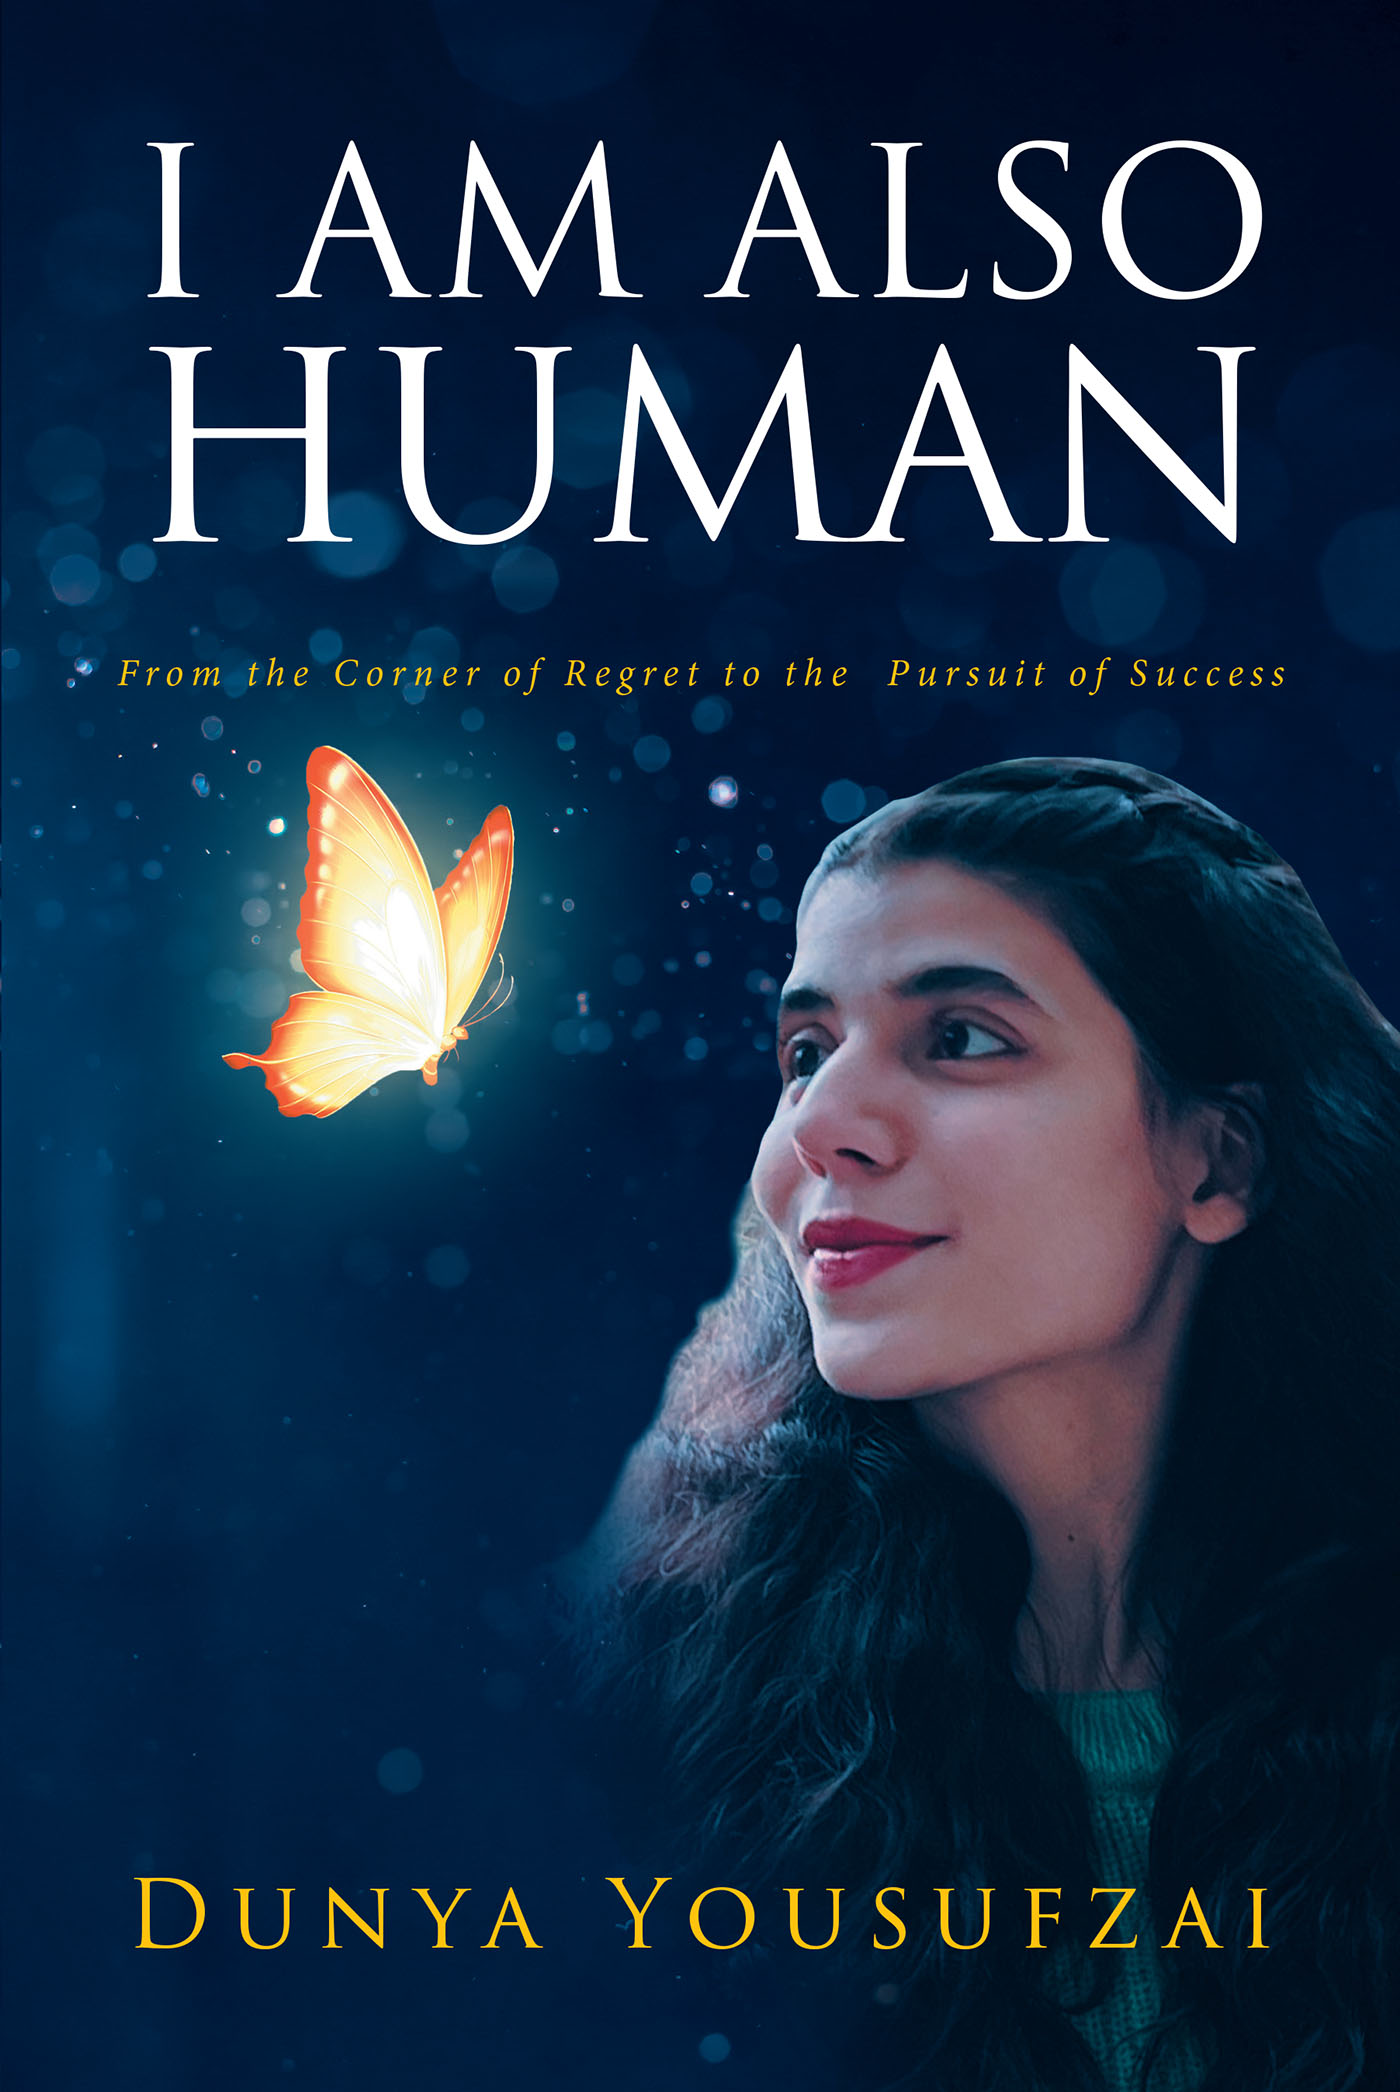 Dunya Yousufzai’s New Book, "I Am Also Human," Discusses the Problems Women Face Through Assaults on Their Freedom and How to Overcome These Obstacles